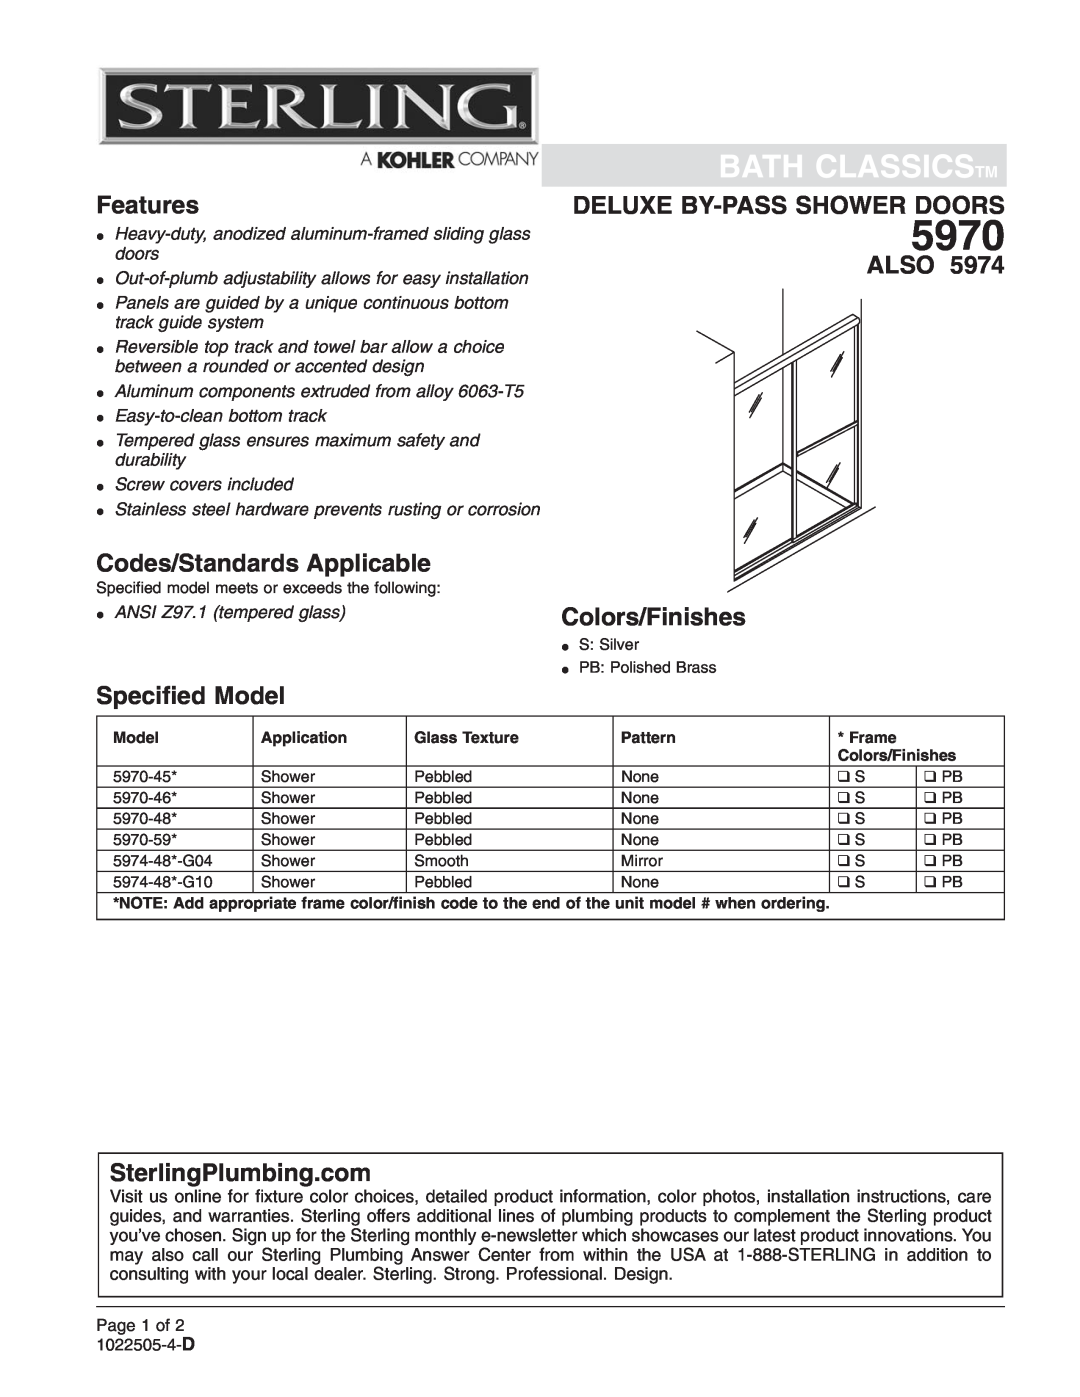 Sterling Plumbing 5970 installation instructions Bath Classicstm, Features, Codes/Standards Applicable, Also 